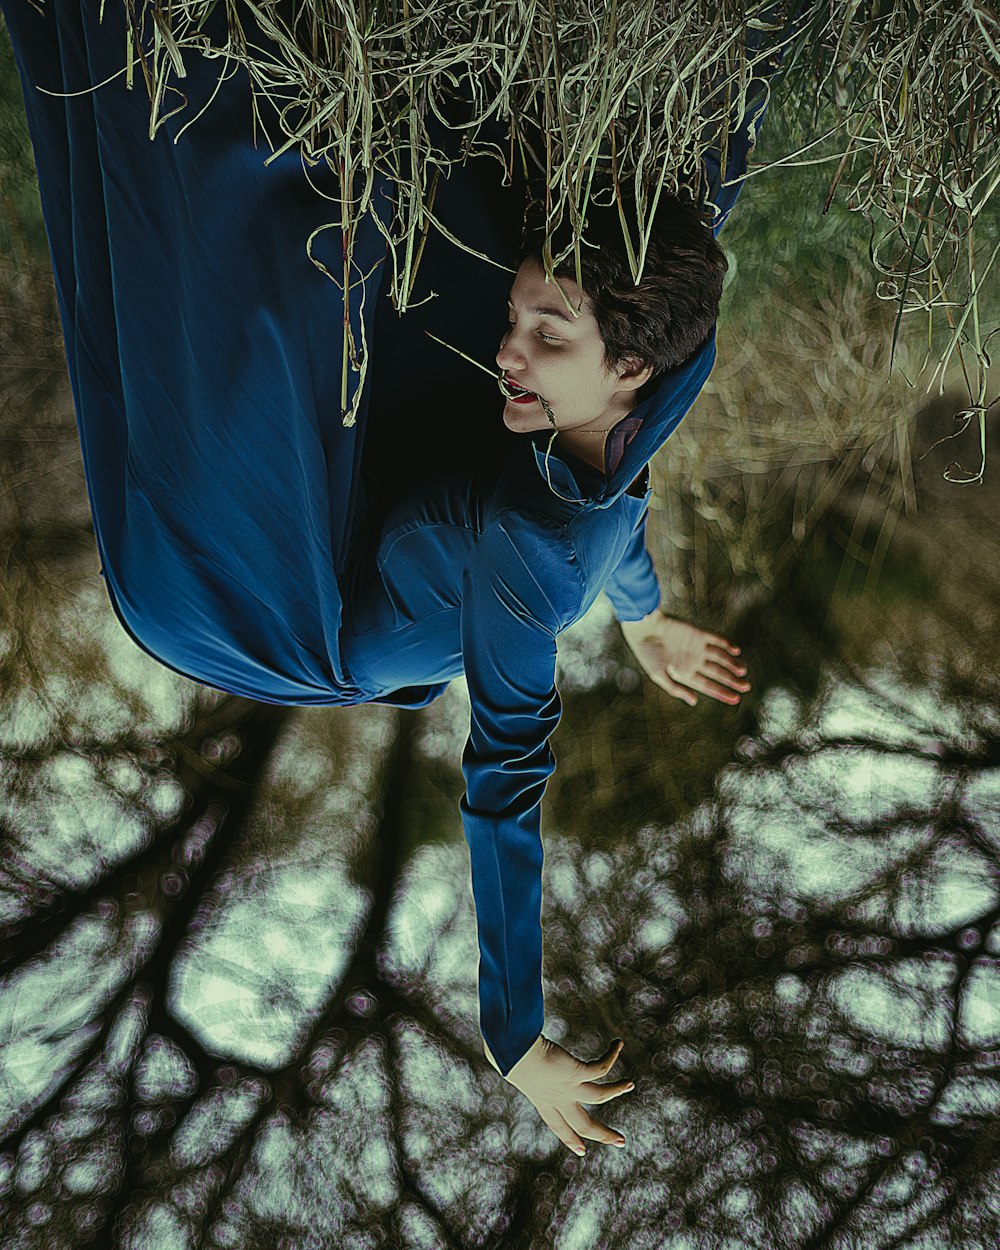 a man hanging upside down from a tree